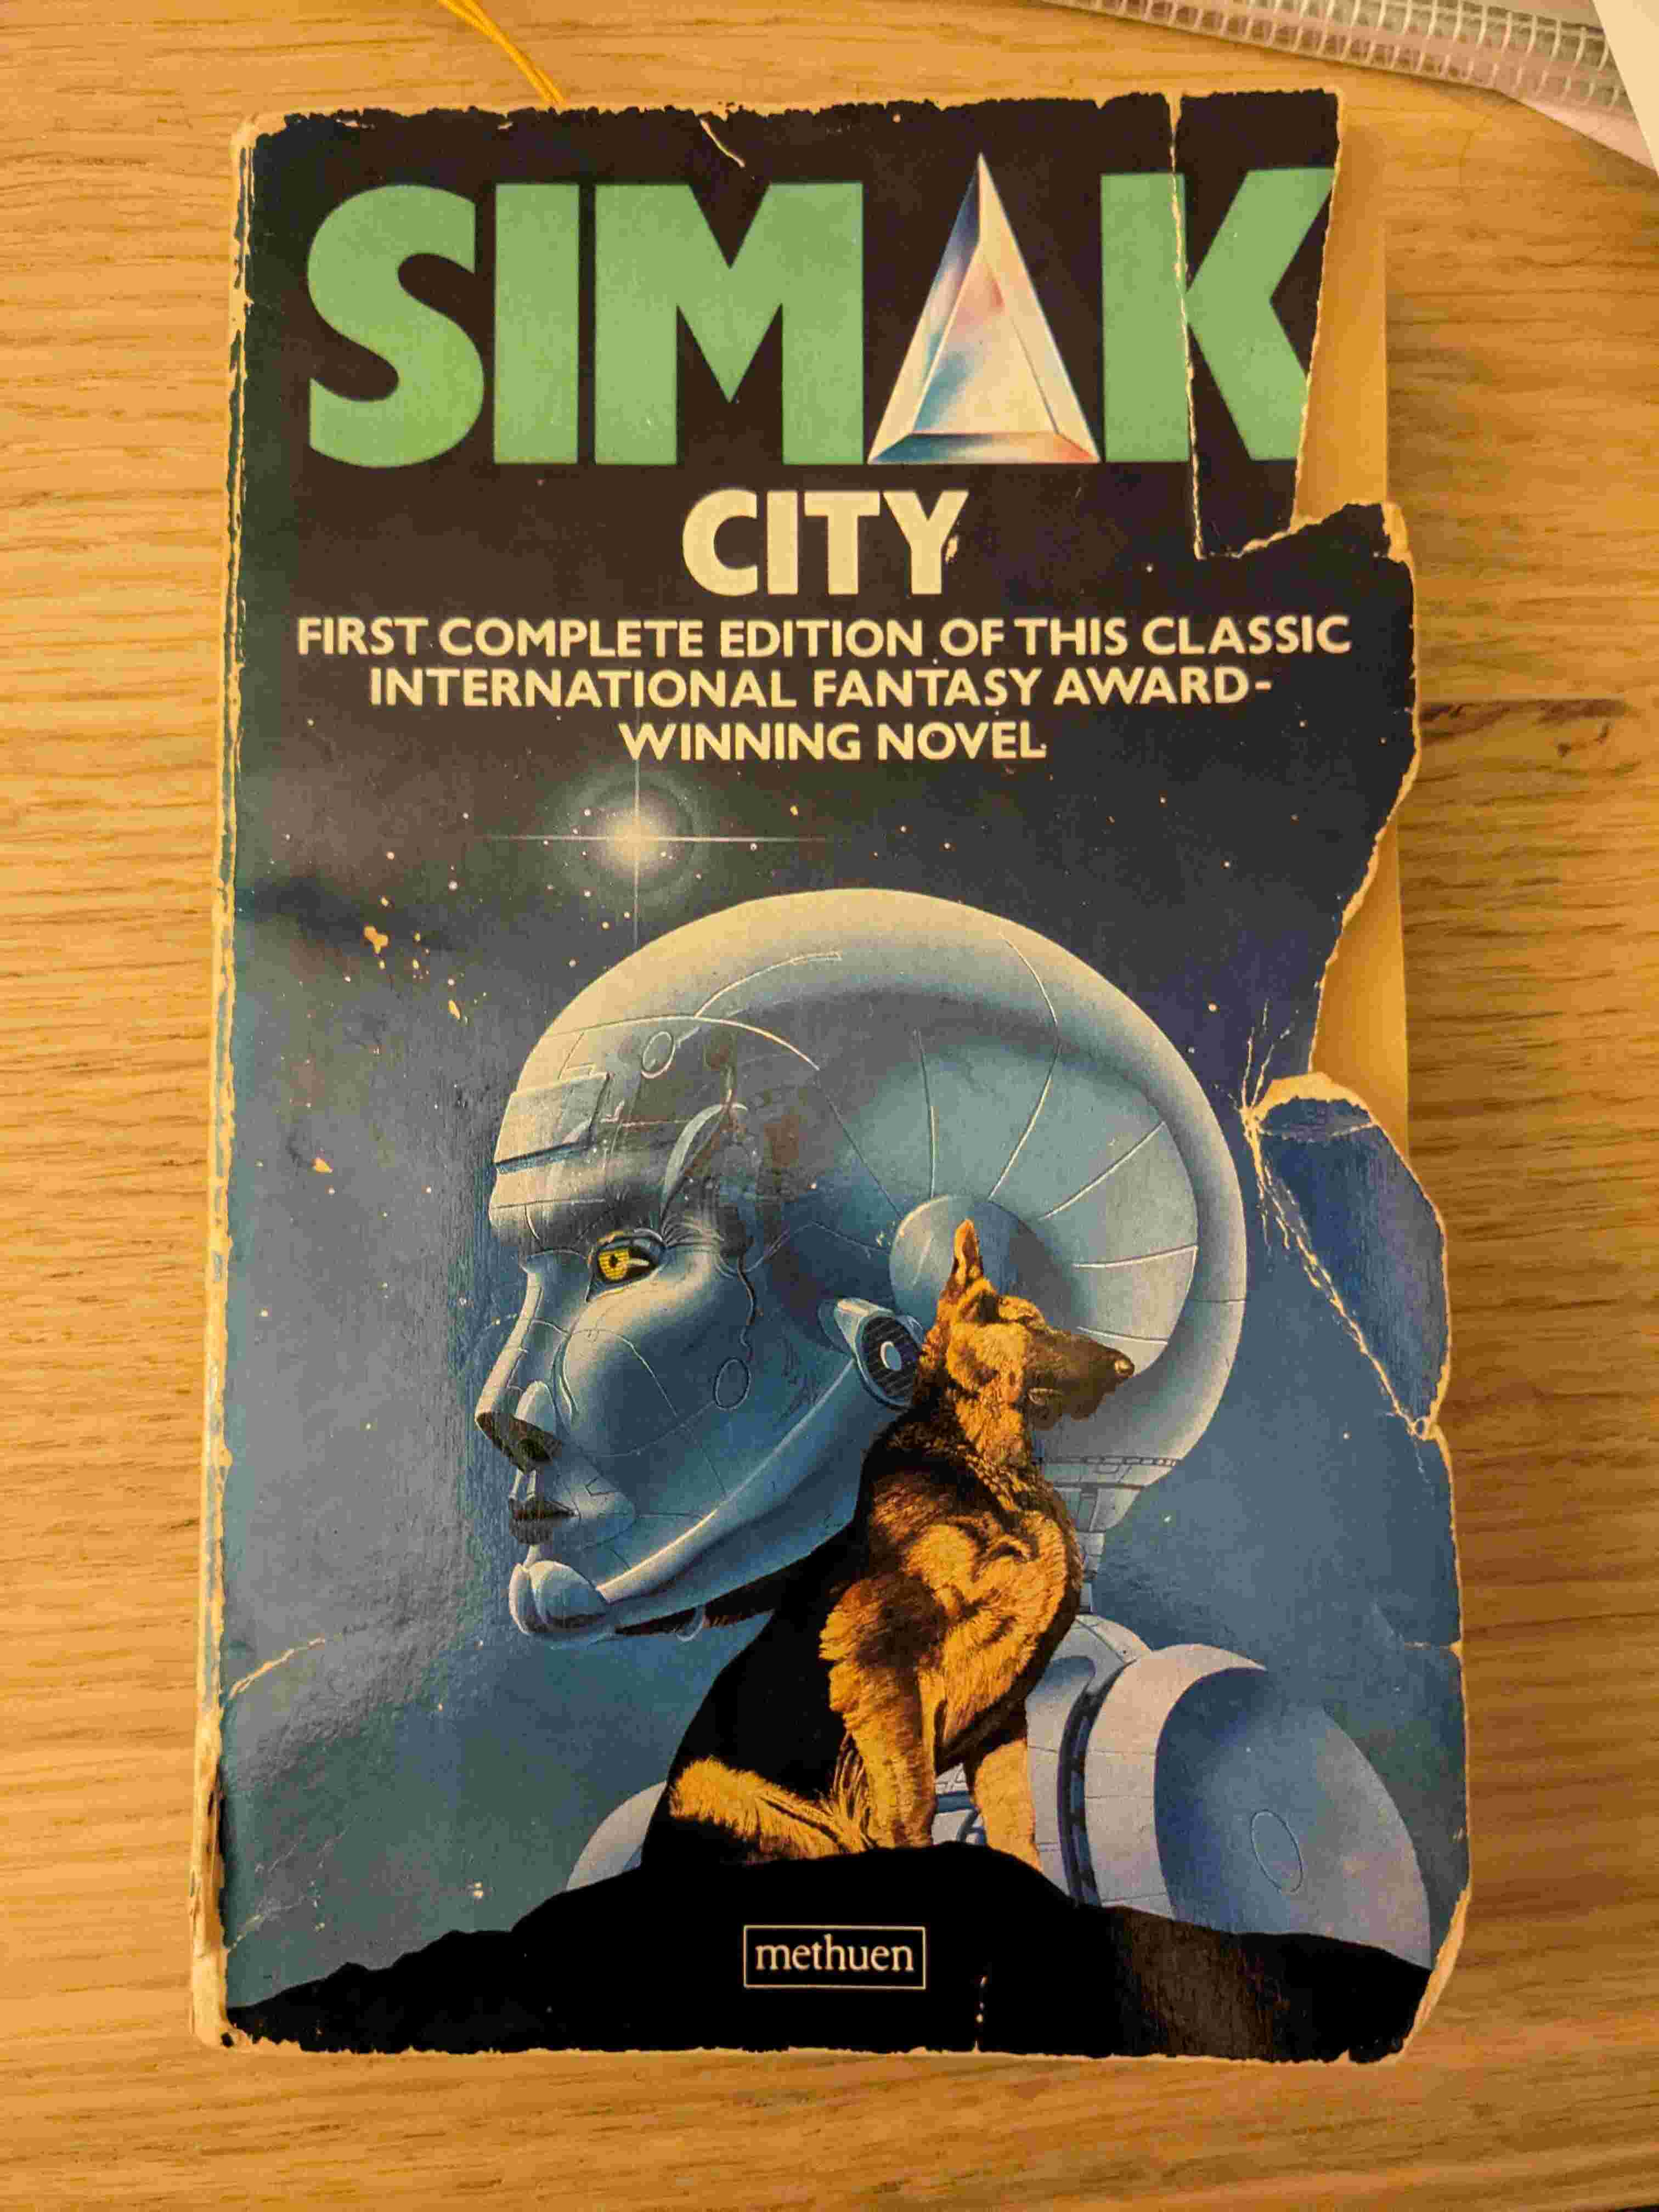 Worn out paperback cover for City by Simak